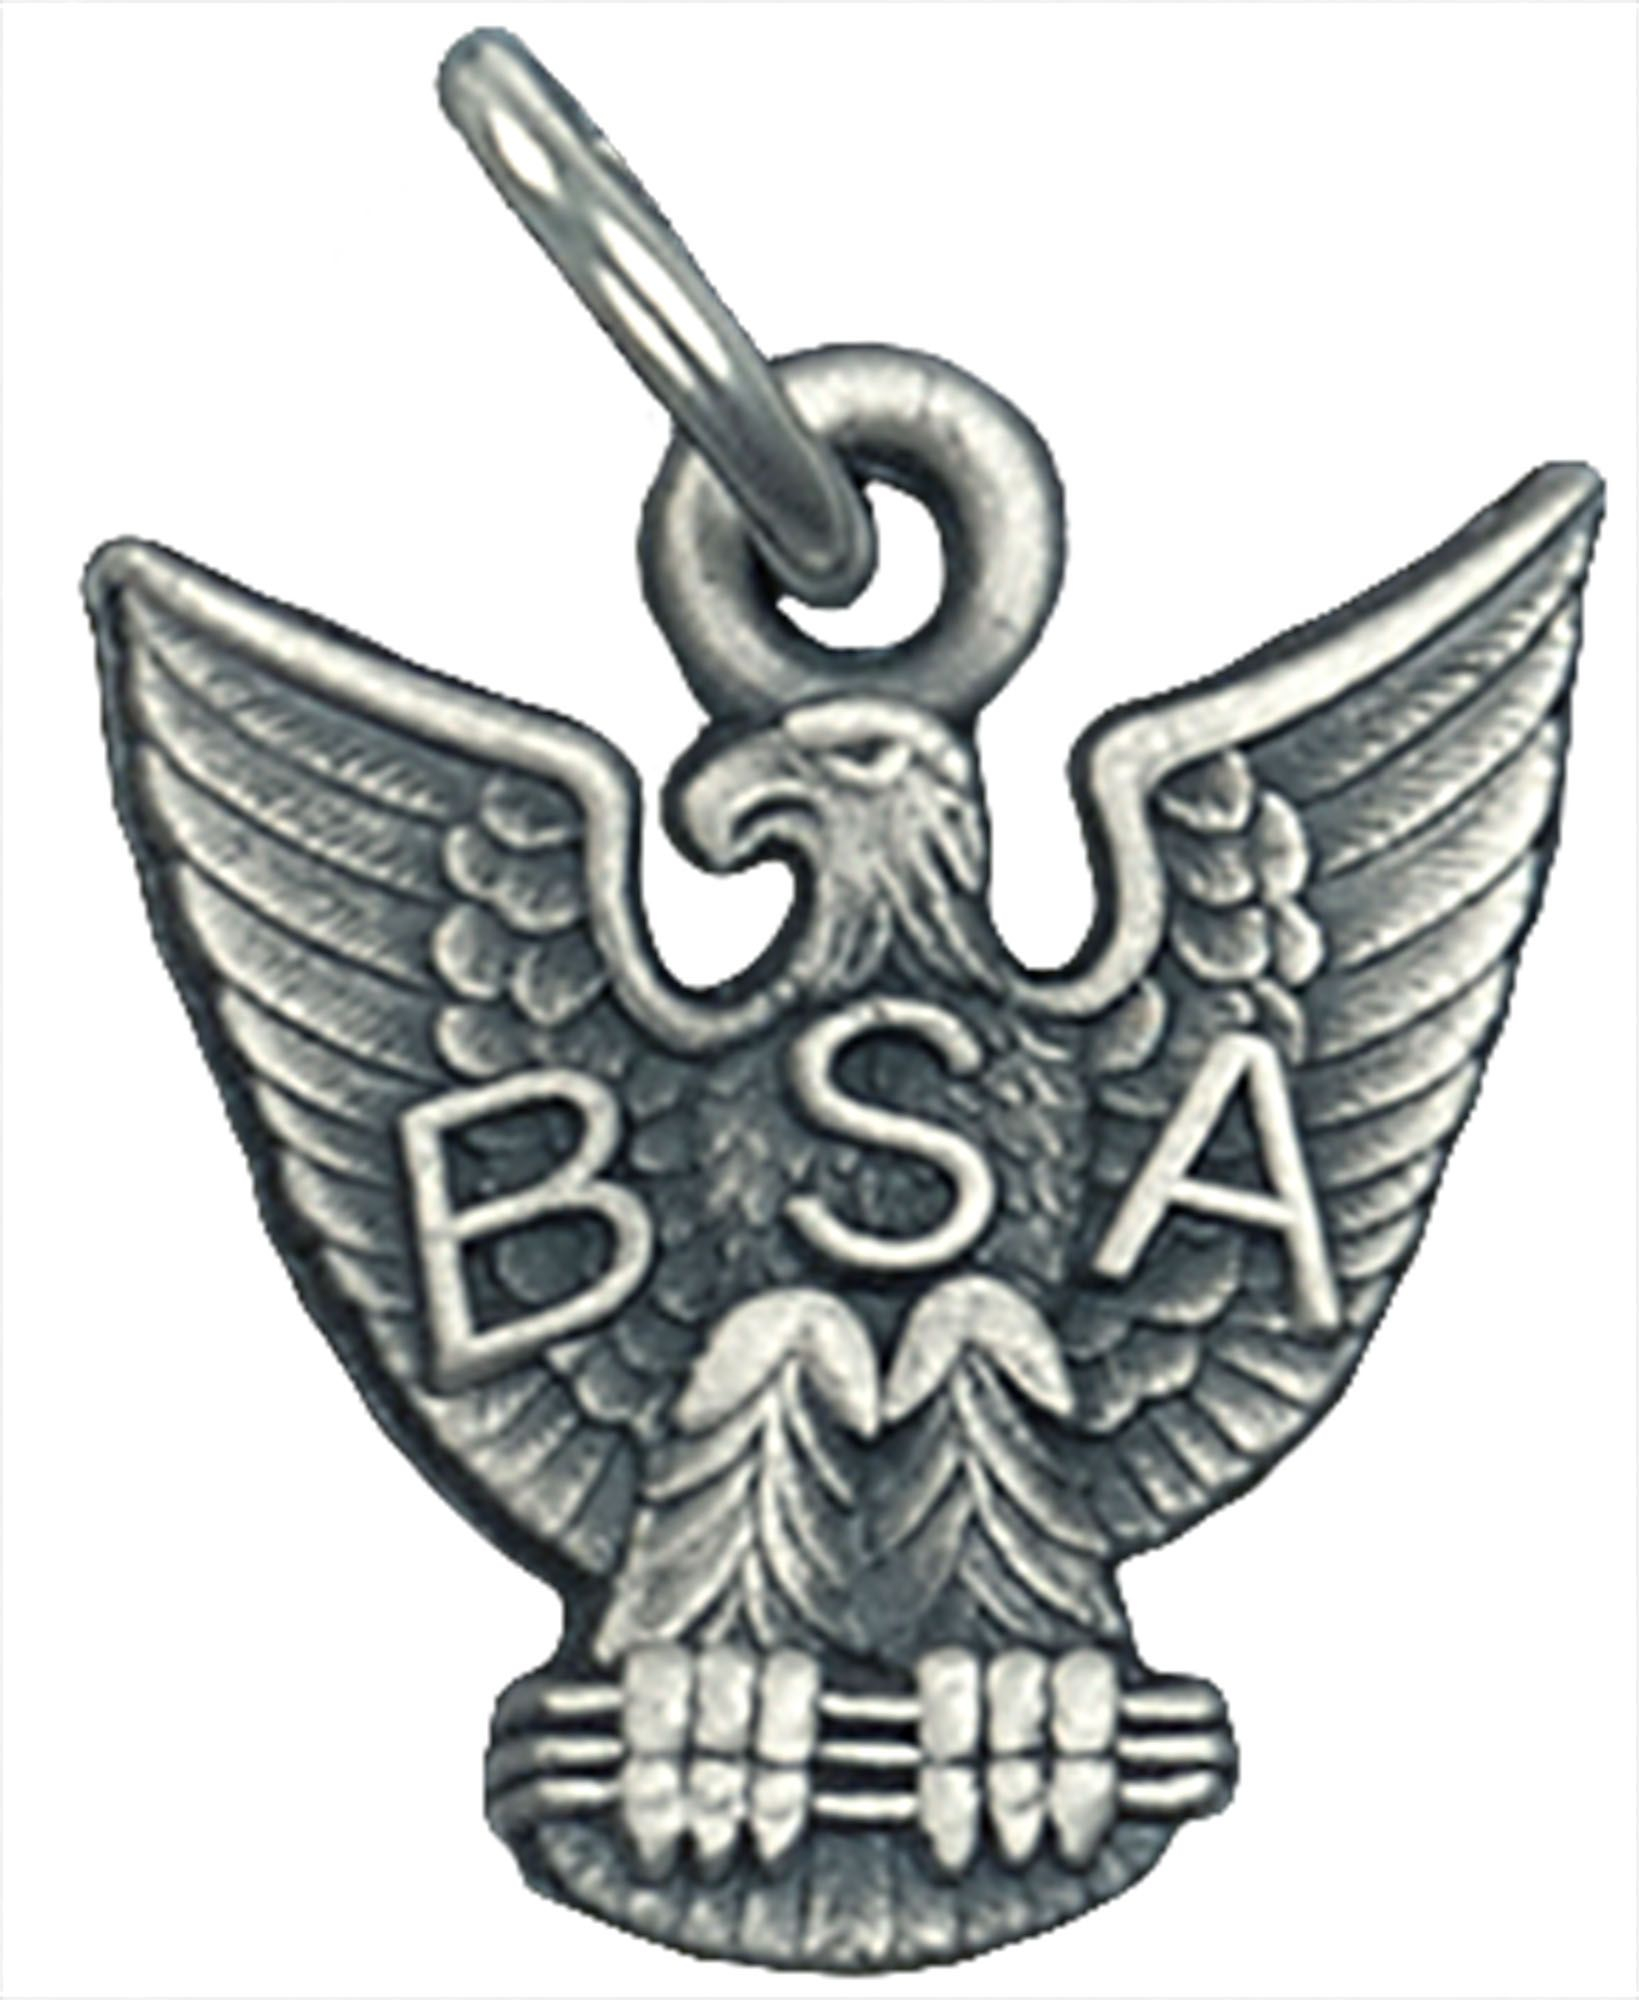 BOY SCOUT LICENSED EAGLE SCOUT BSA METAL SILVER TONE CHARM MOM DAD GIFT NEW